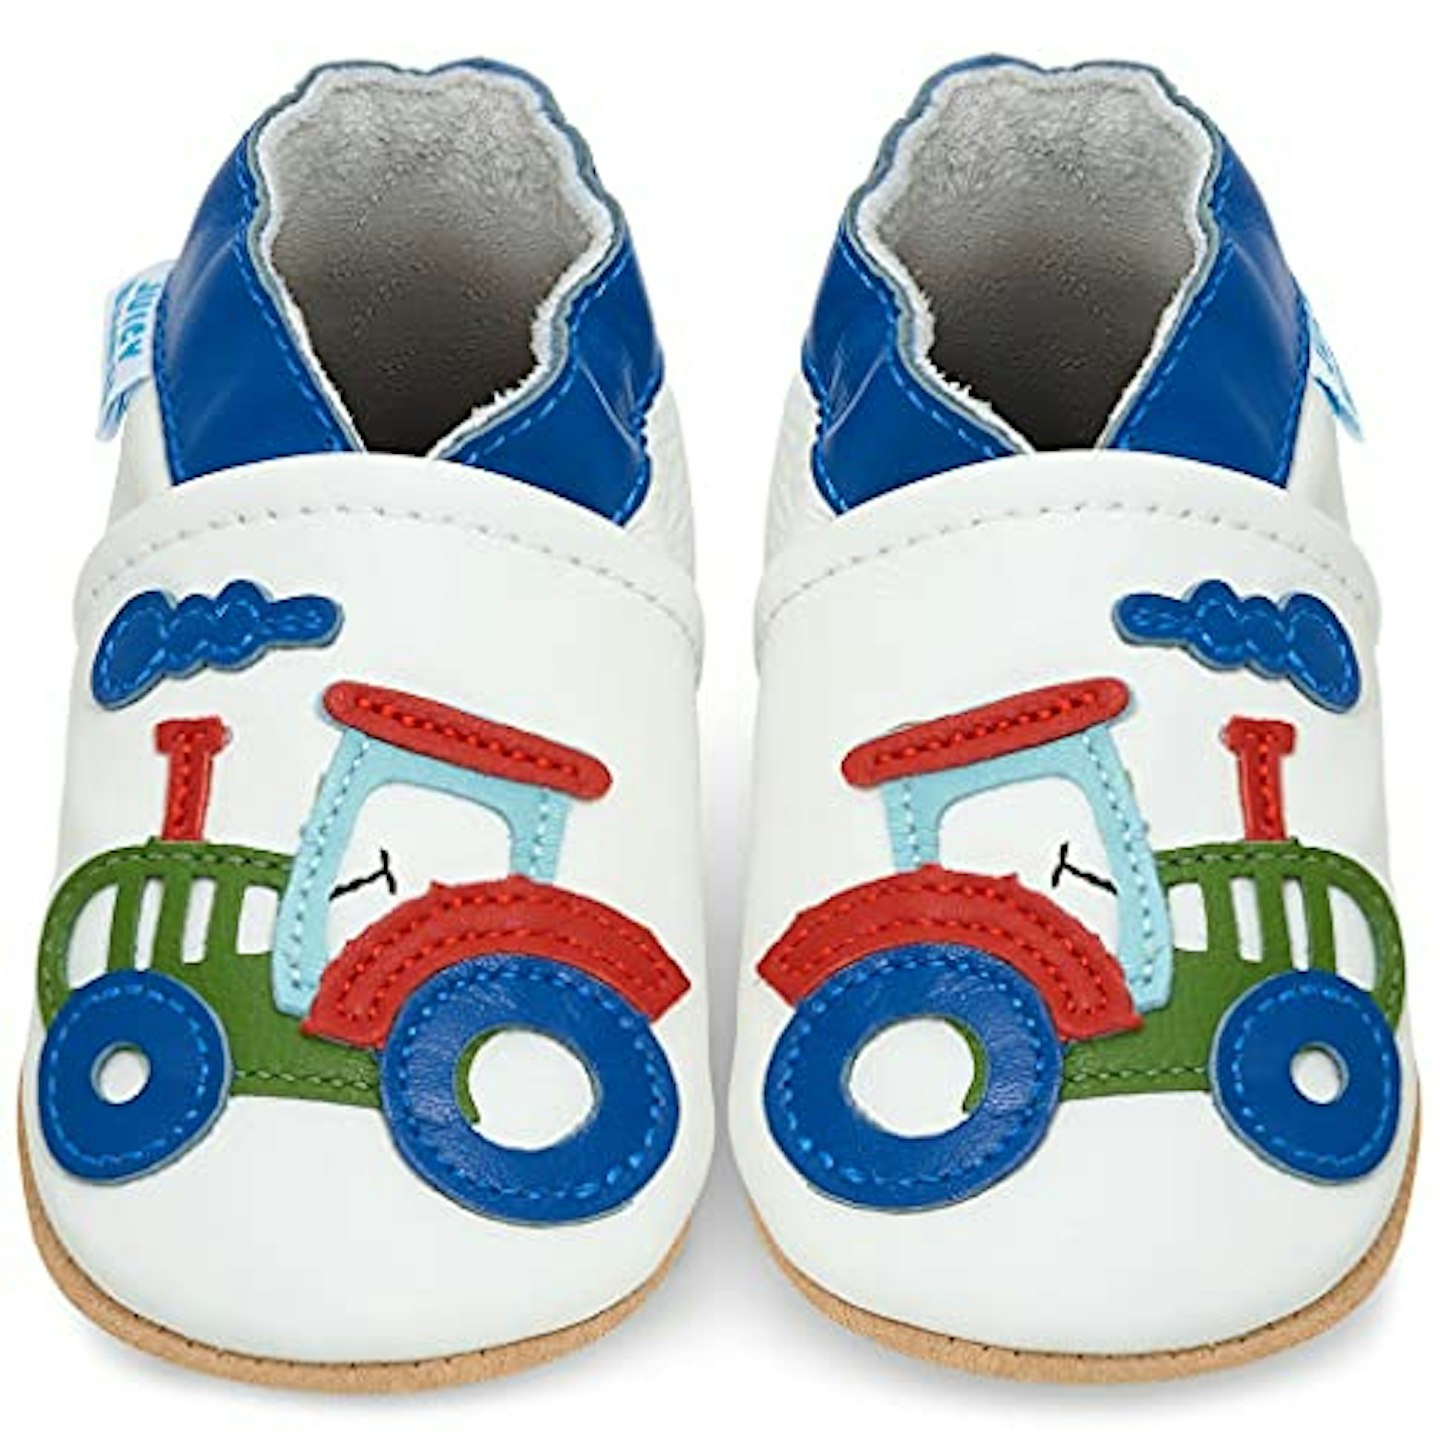 Juicy Bumbles Baby Shoes with Soft Sole